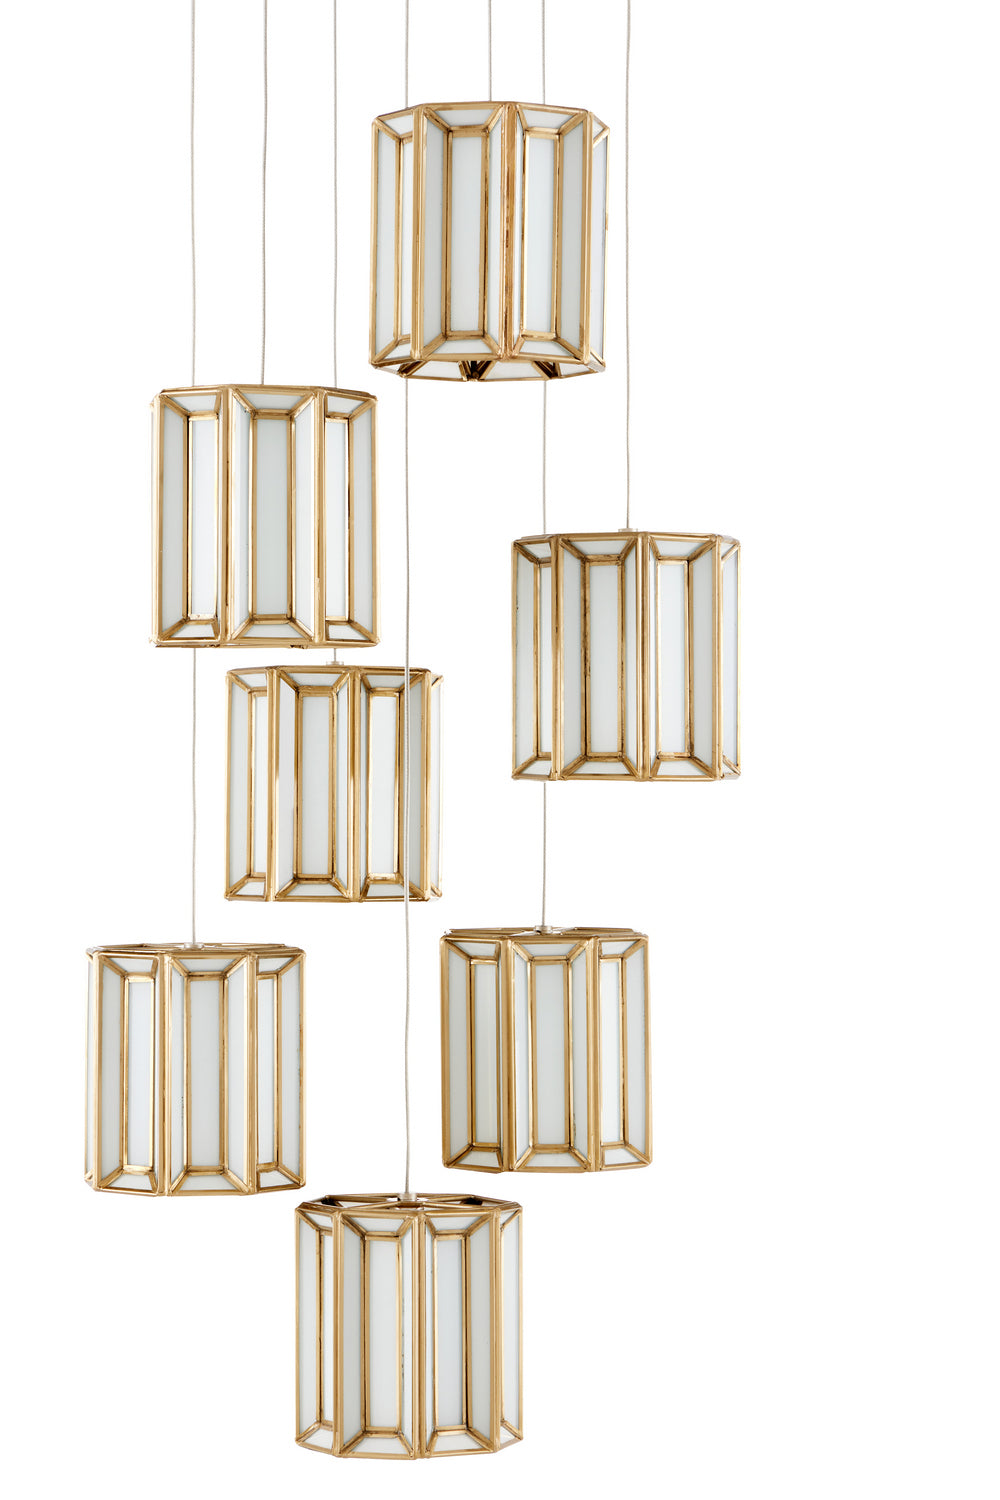 Seven Light Pendant from the Daze collection in Antique Brass/White/Painted Silver finish